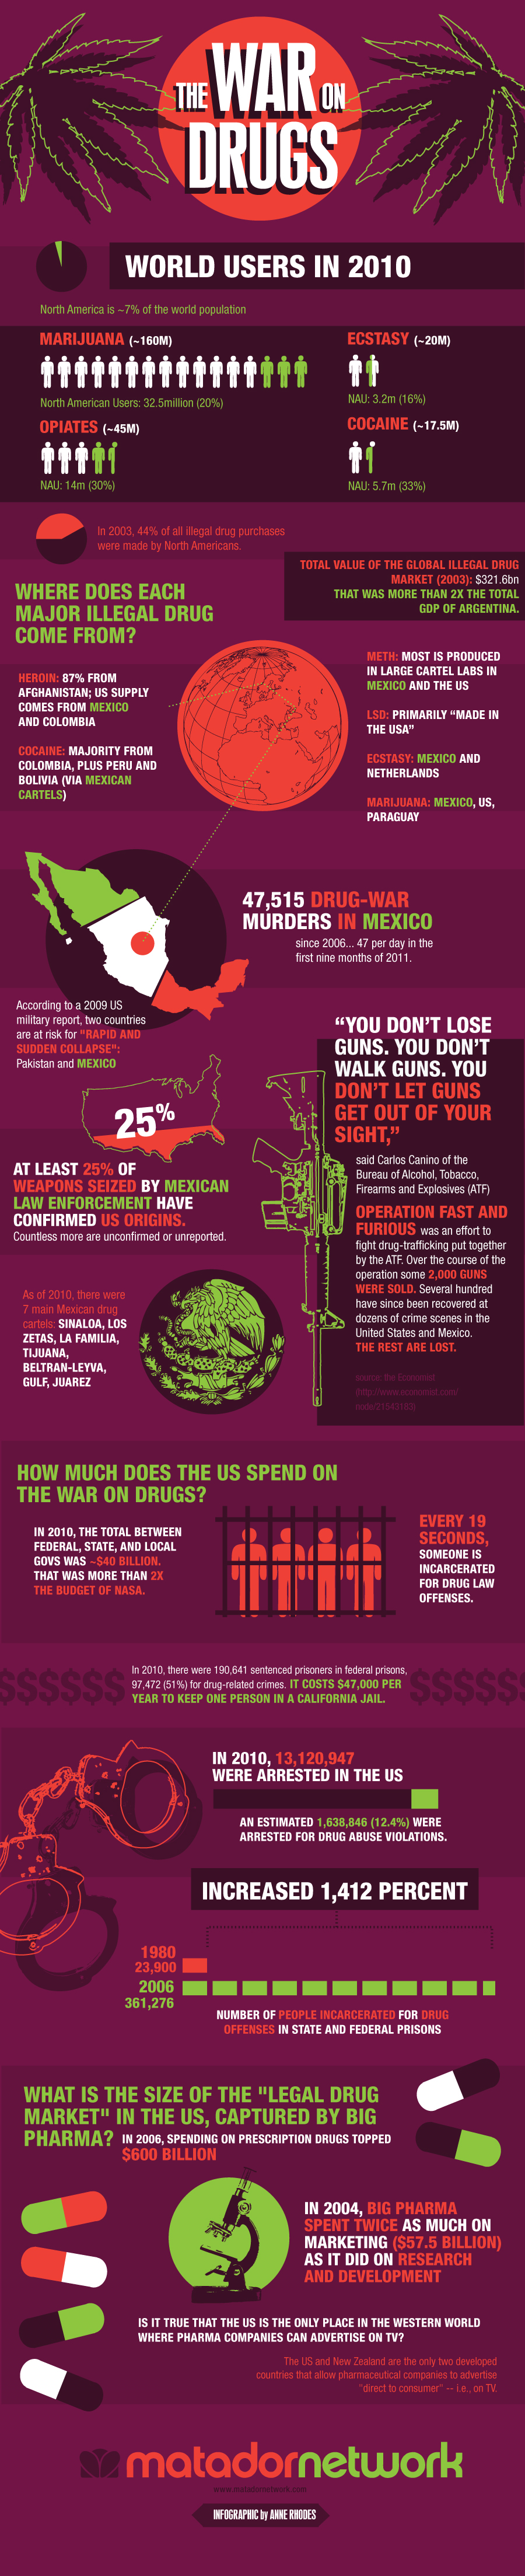 Infographic: Why we’re losing the ‘War on Drugs’